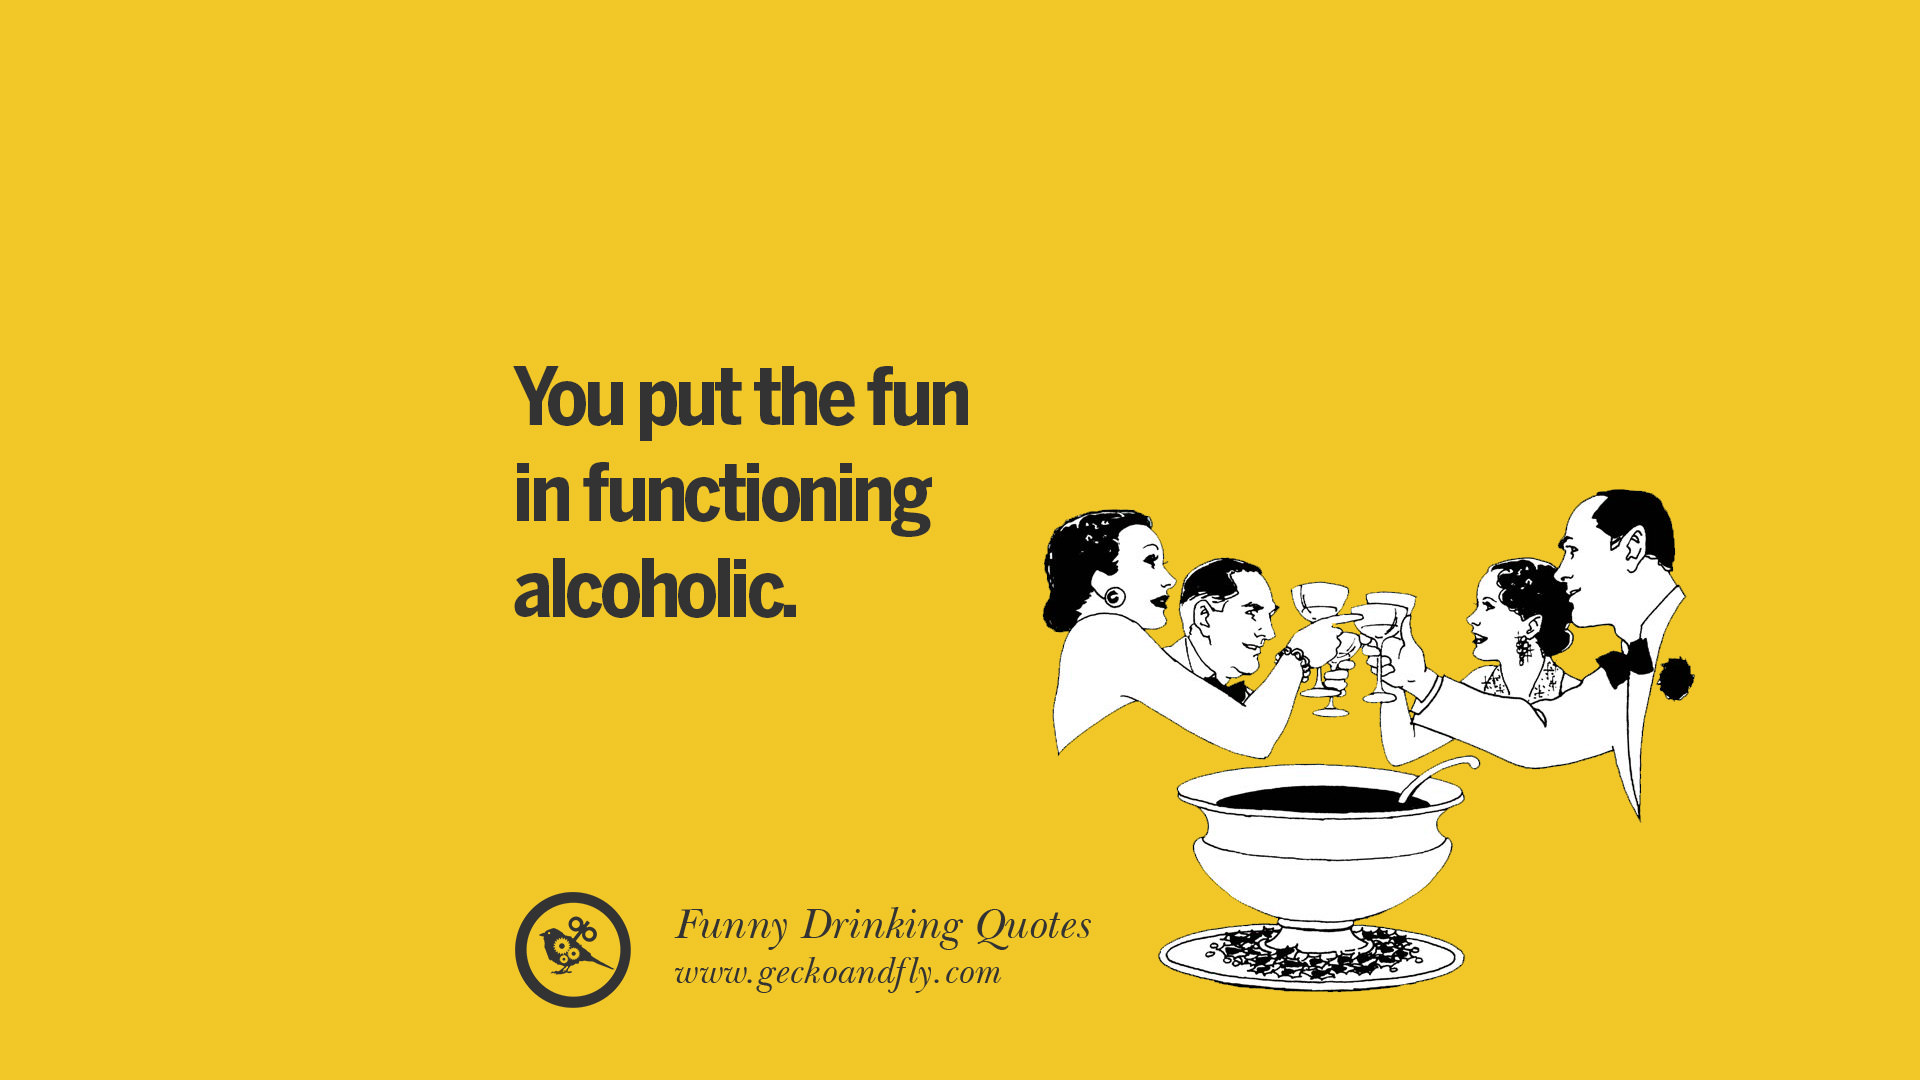 Alcohol funny drinking fun alcoholic quotes put quote partying saying having wine beer functioning warning